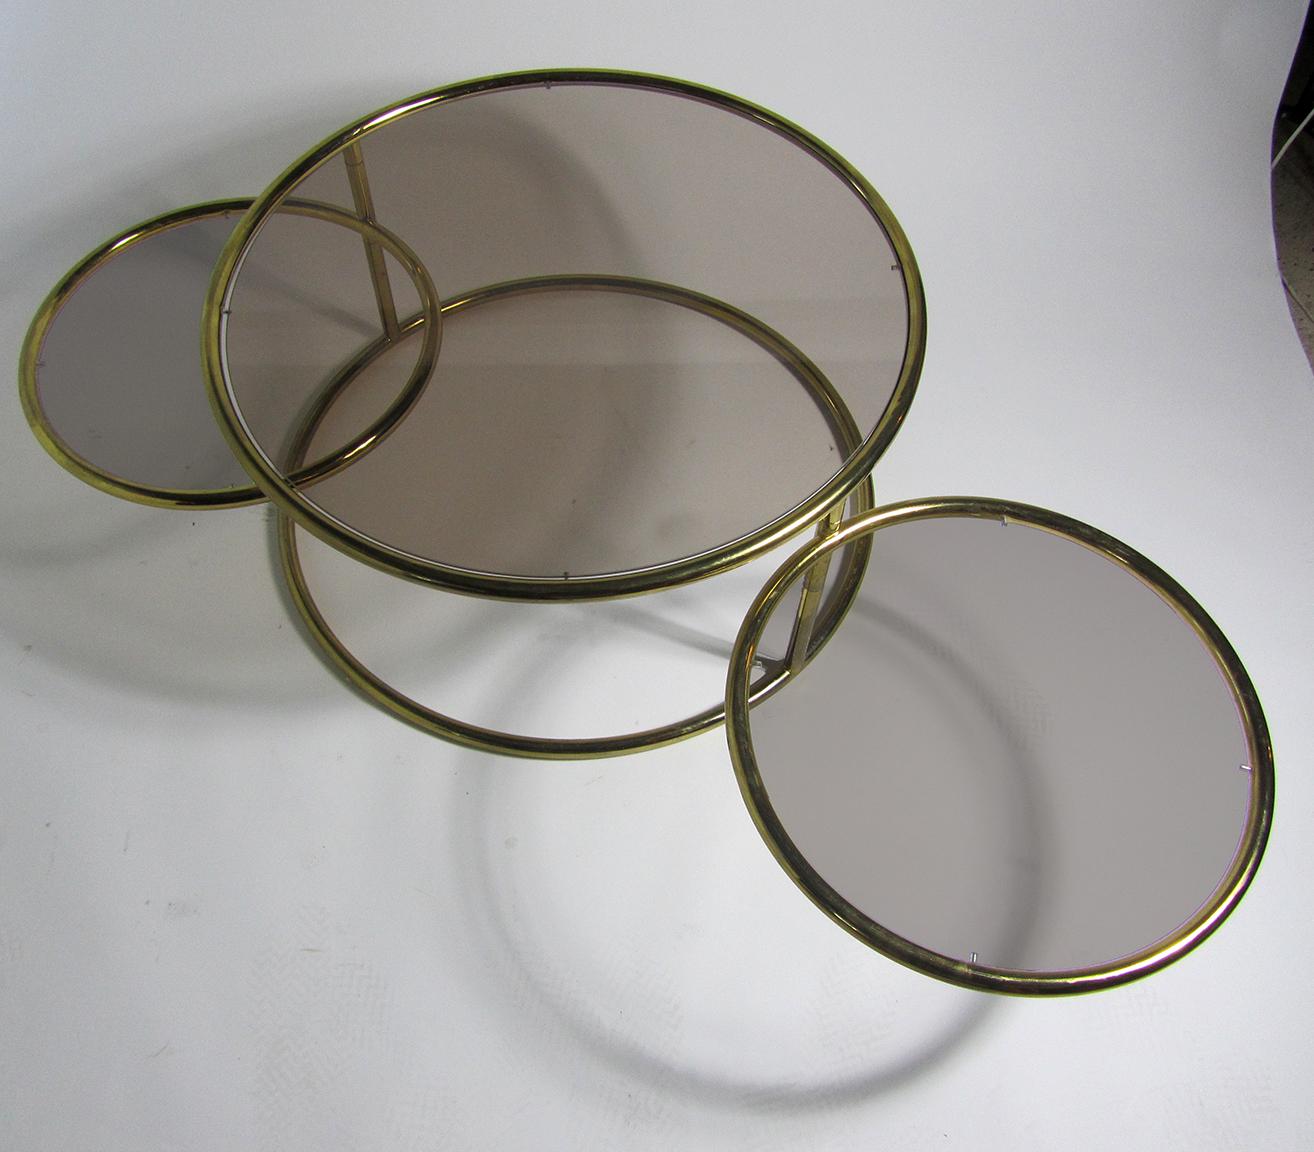 North American American Modern Brass and Smoked Glass 3 Ring Coffee Table by Milo Baughman